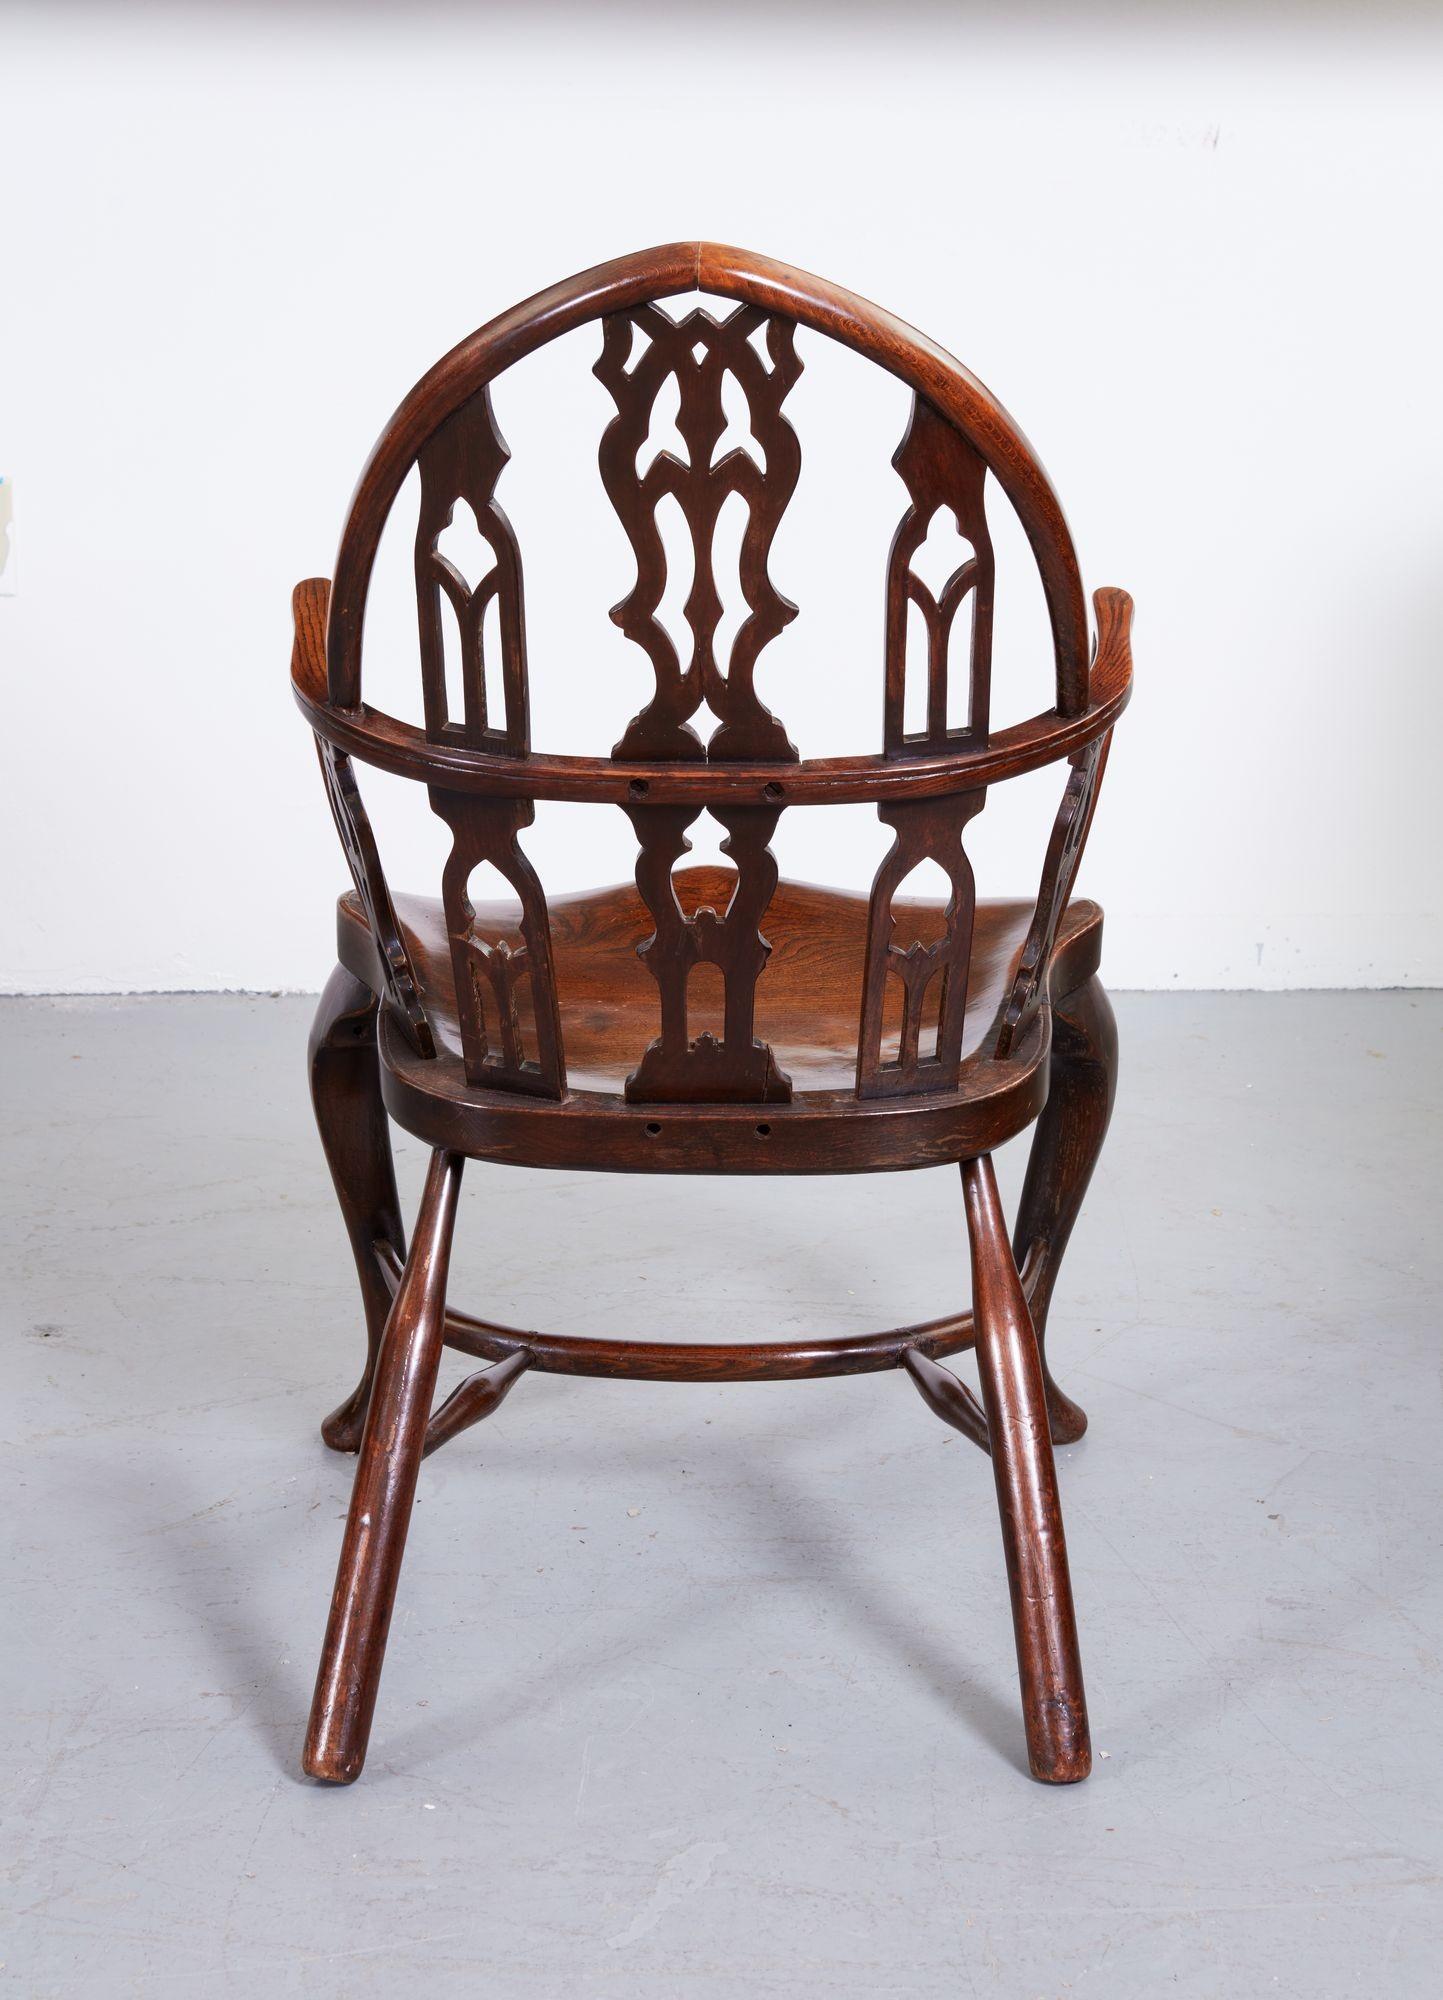 Carved 19th Century English Gothic Windsor Chair